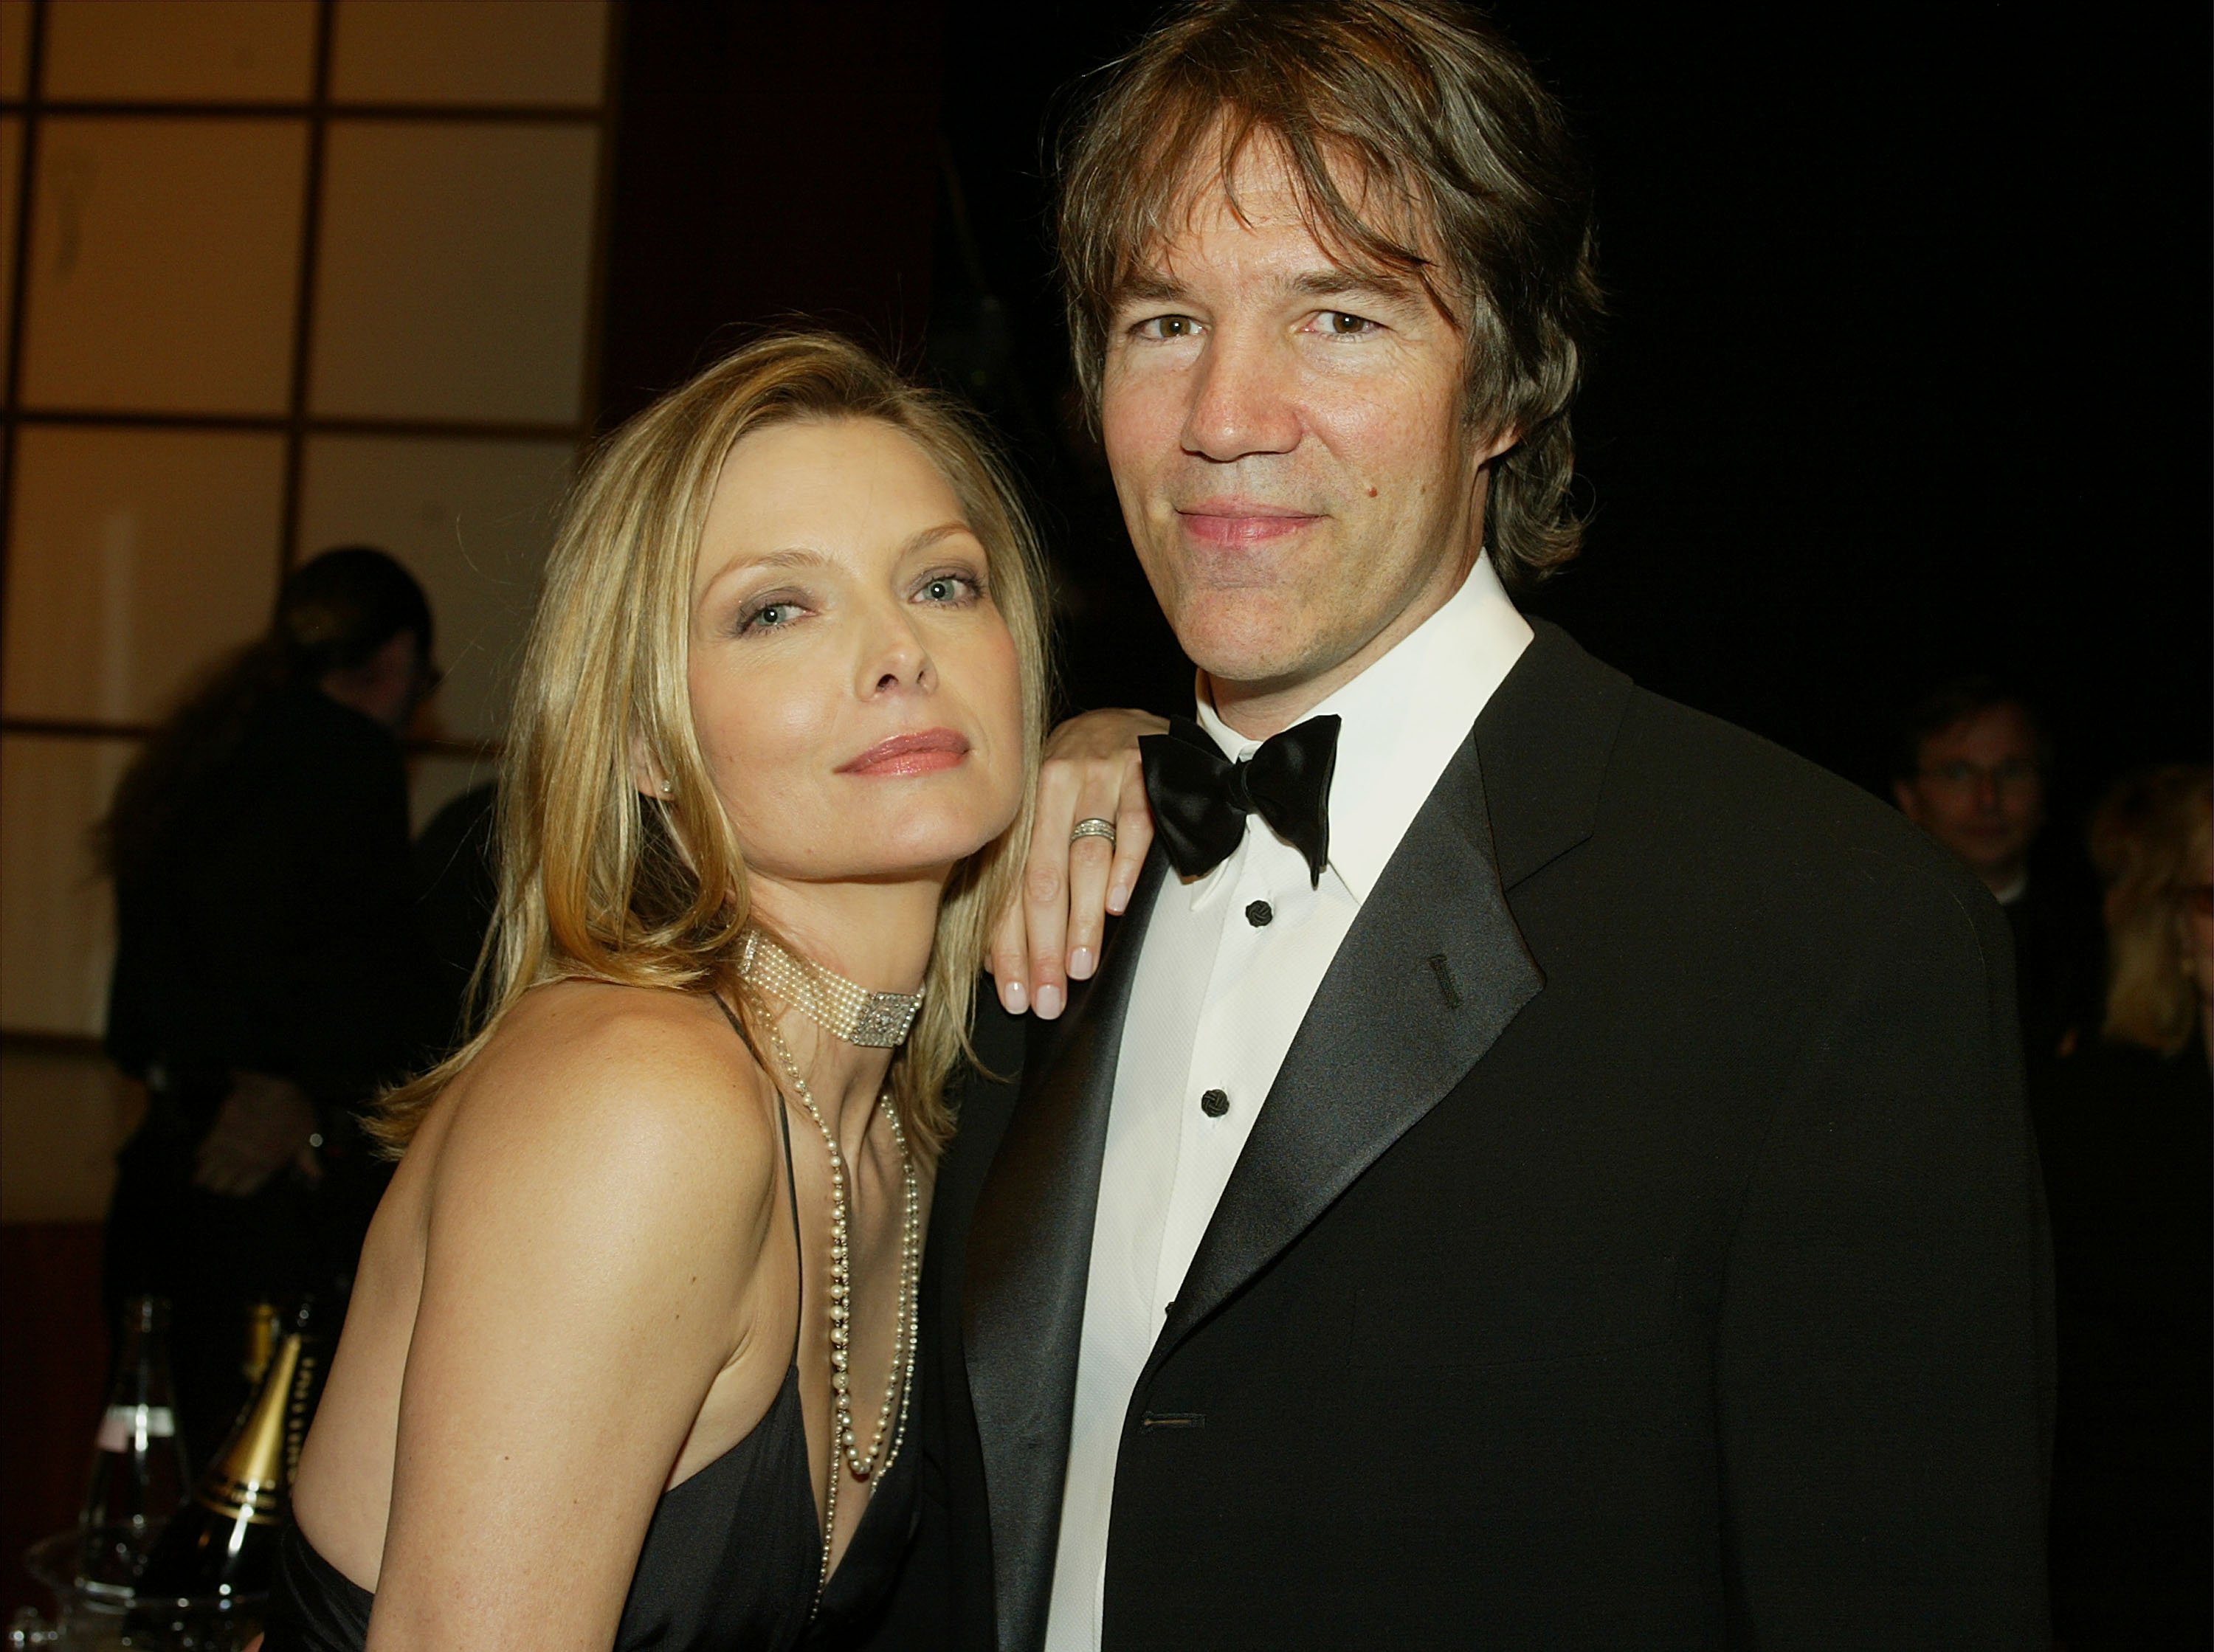 Actress Michelle Pfeiffer and David E. Kelley pose during the 9th Annual Screen Actors Guild Awards at the Shrine Auditorium on March 9, 2003 in Los Angeles, California. | Source: Getty Images